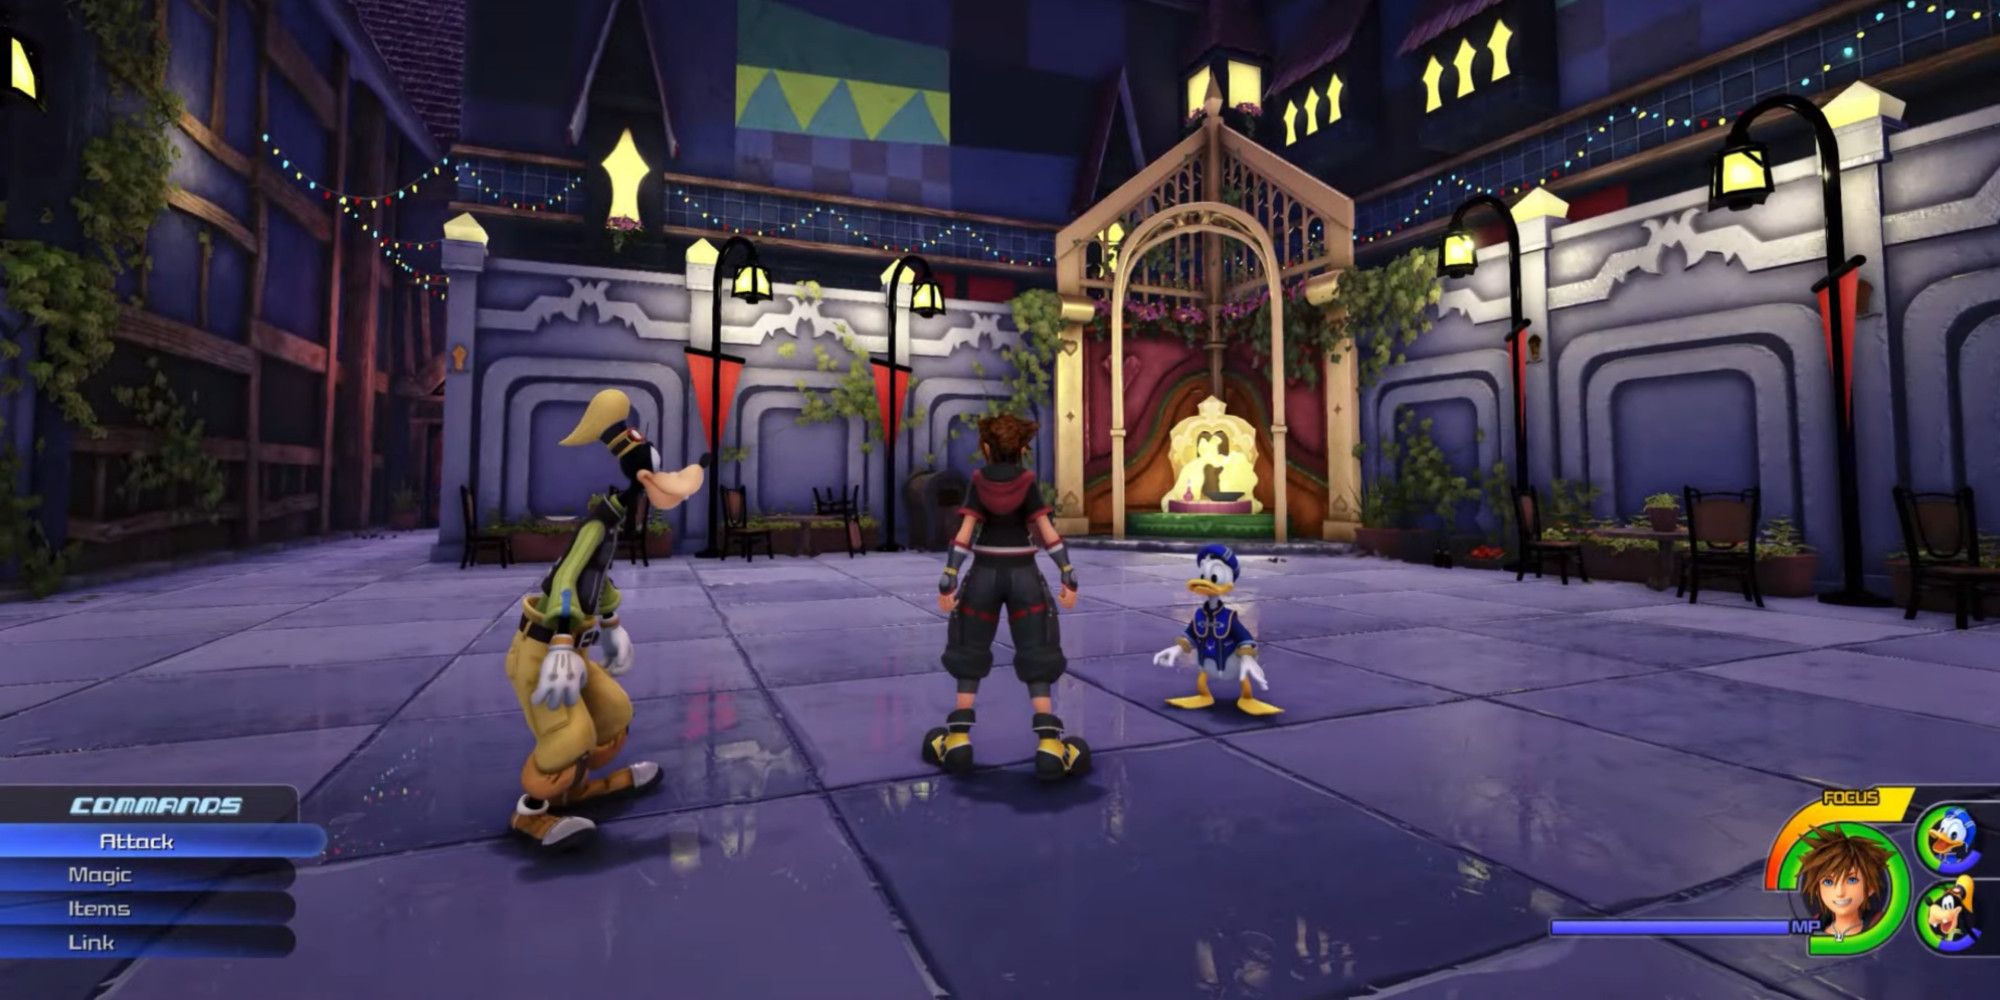 Sora, Donald, and Goofy standing in a small plaza surrounded by chairs, tables, and a small glowing statue(1)